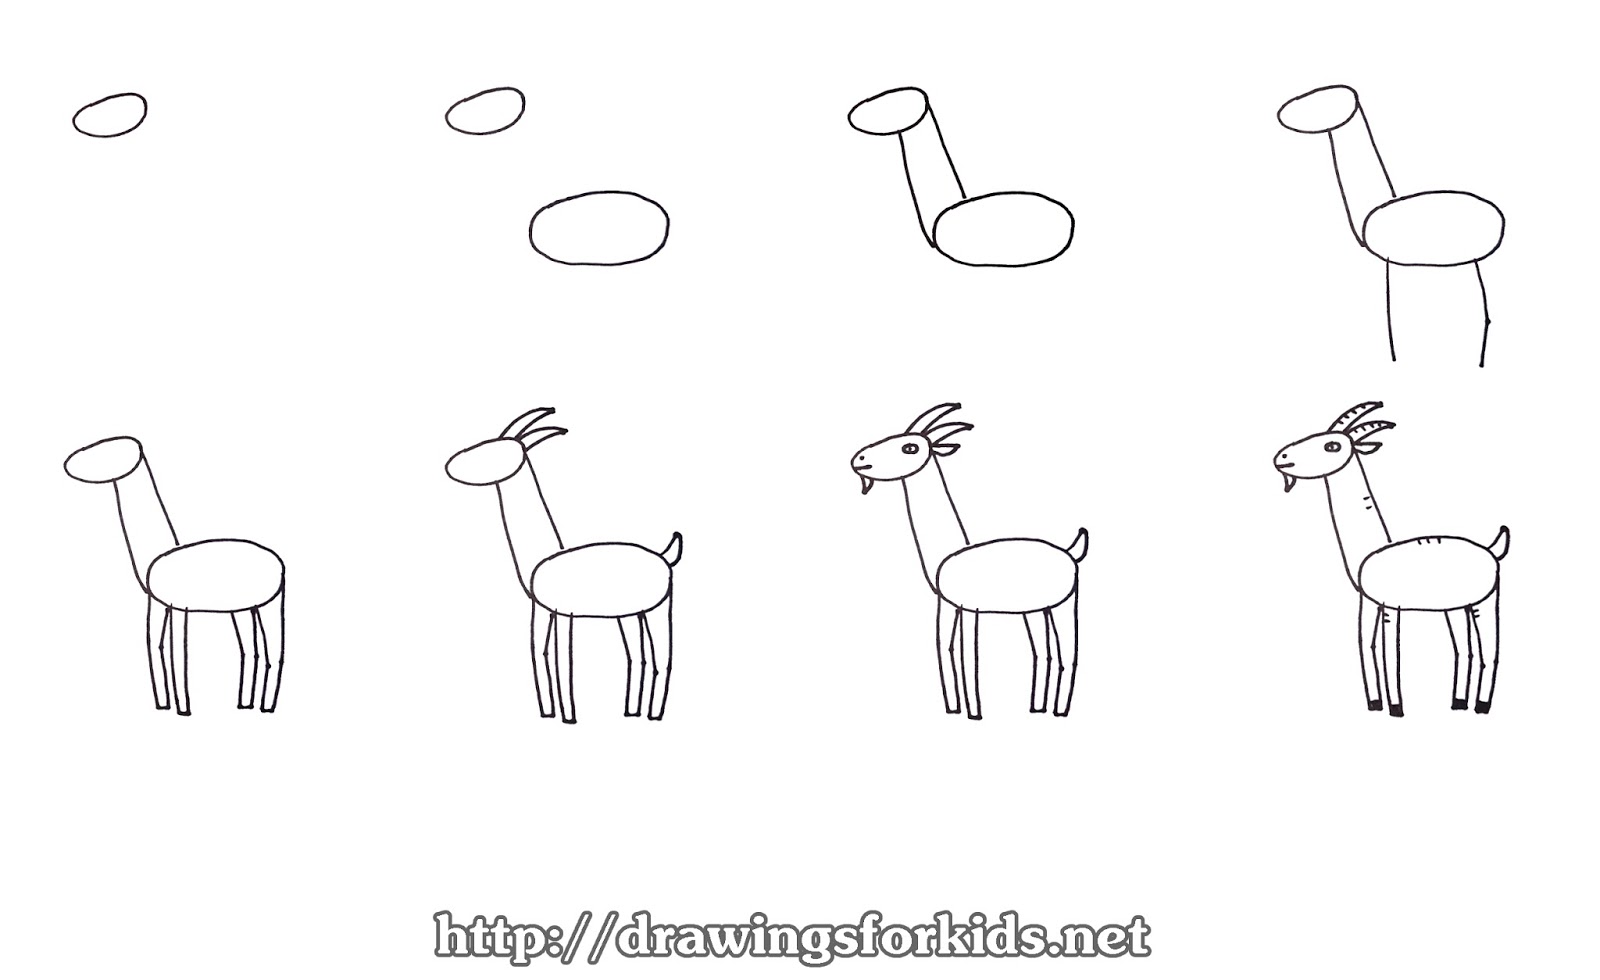 How to draw a GOAT for kids - drawingsforkids.net